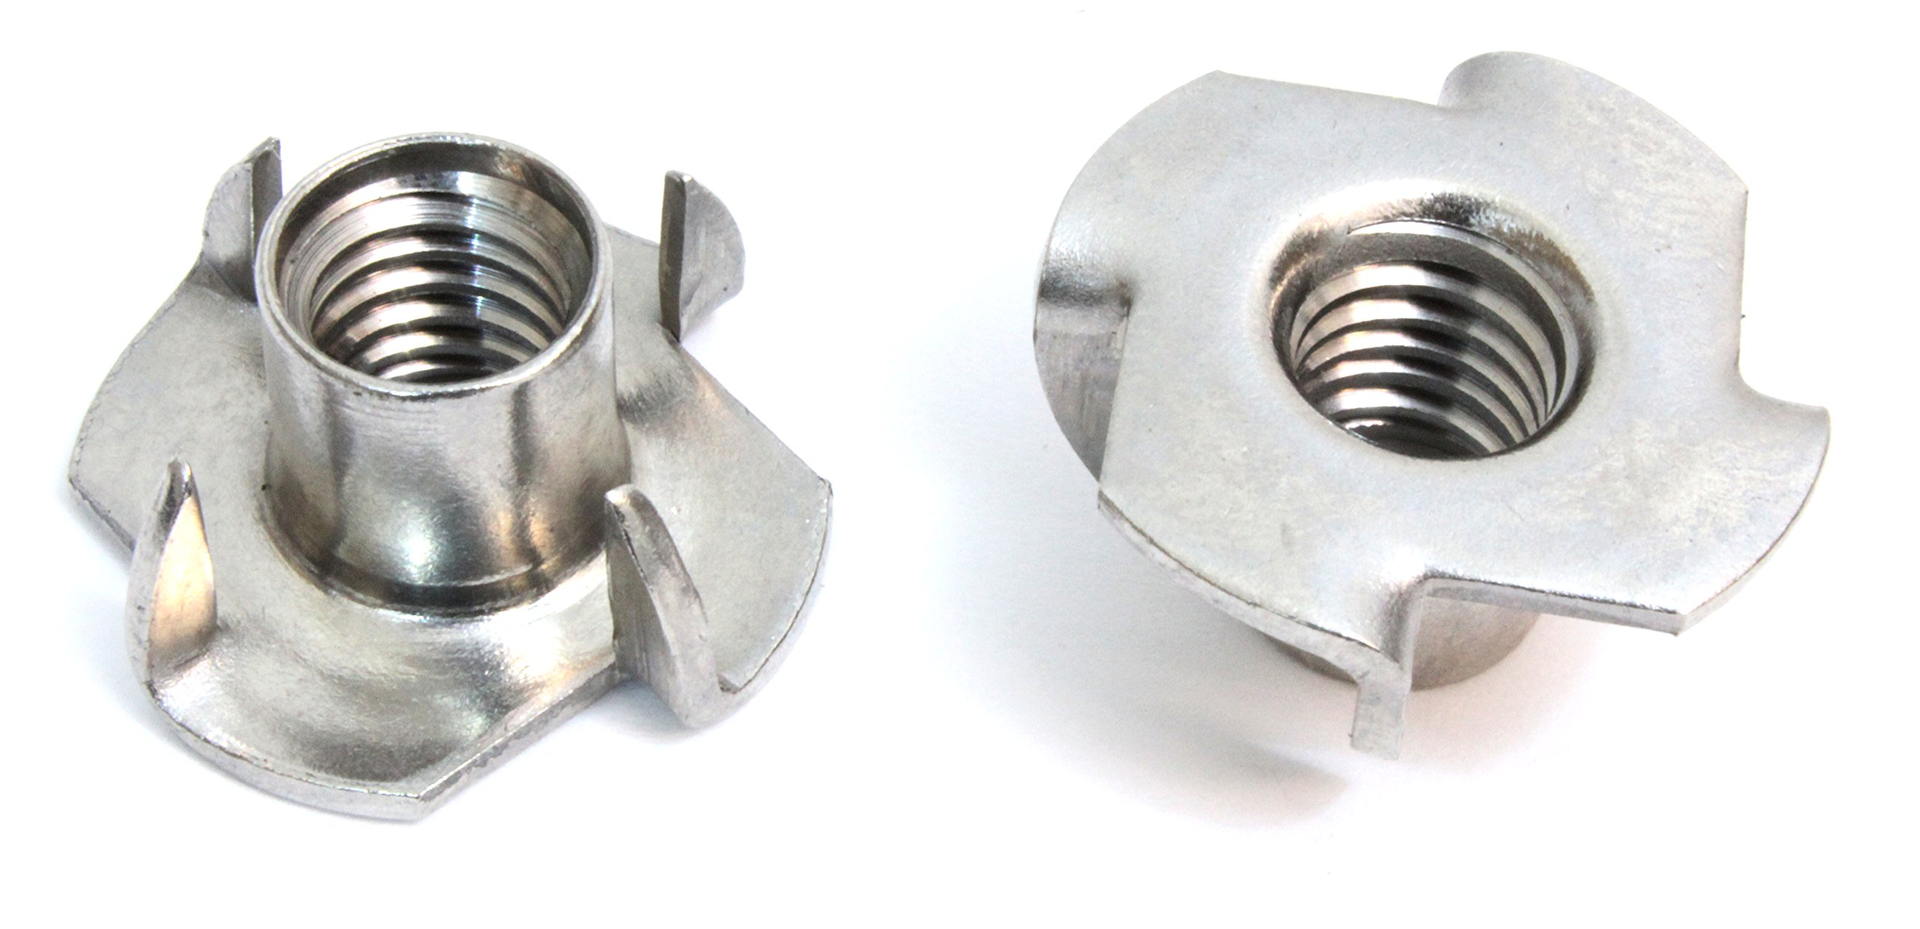 Screws vs T-Nuts vs Threaded Inserts for 8 subs